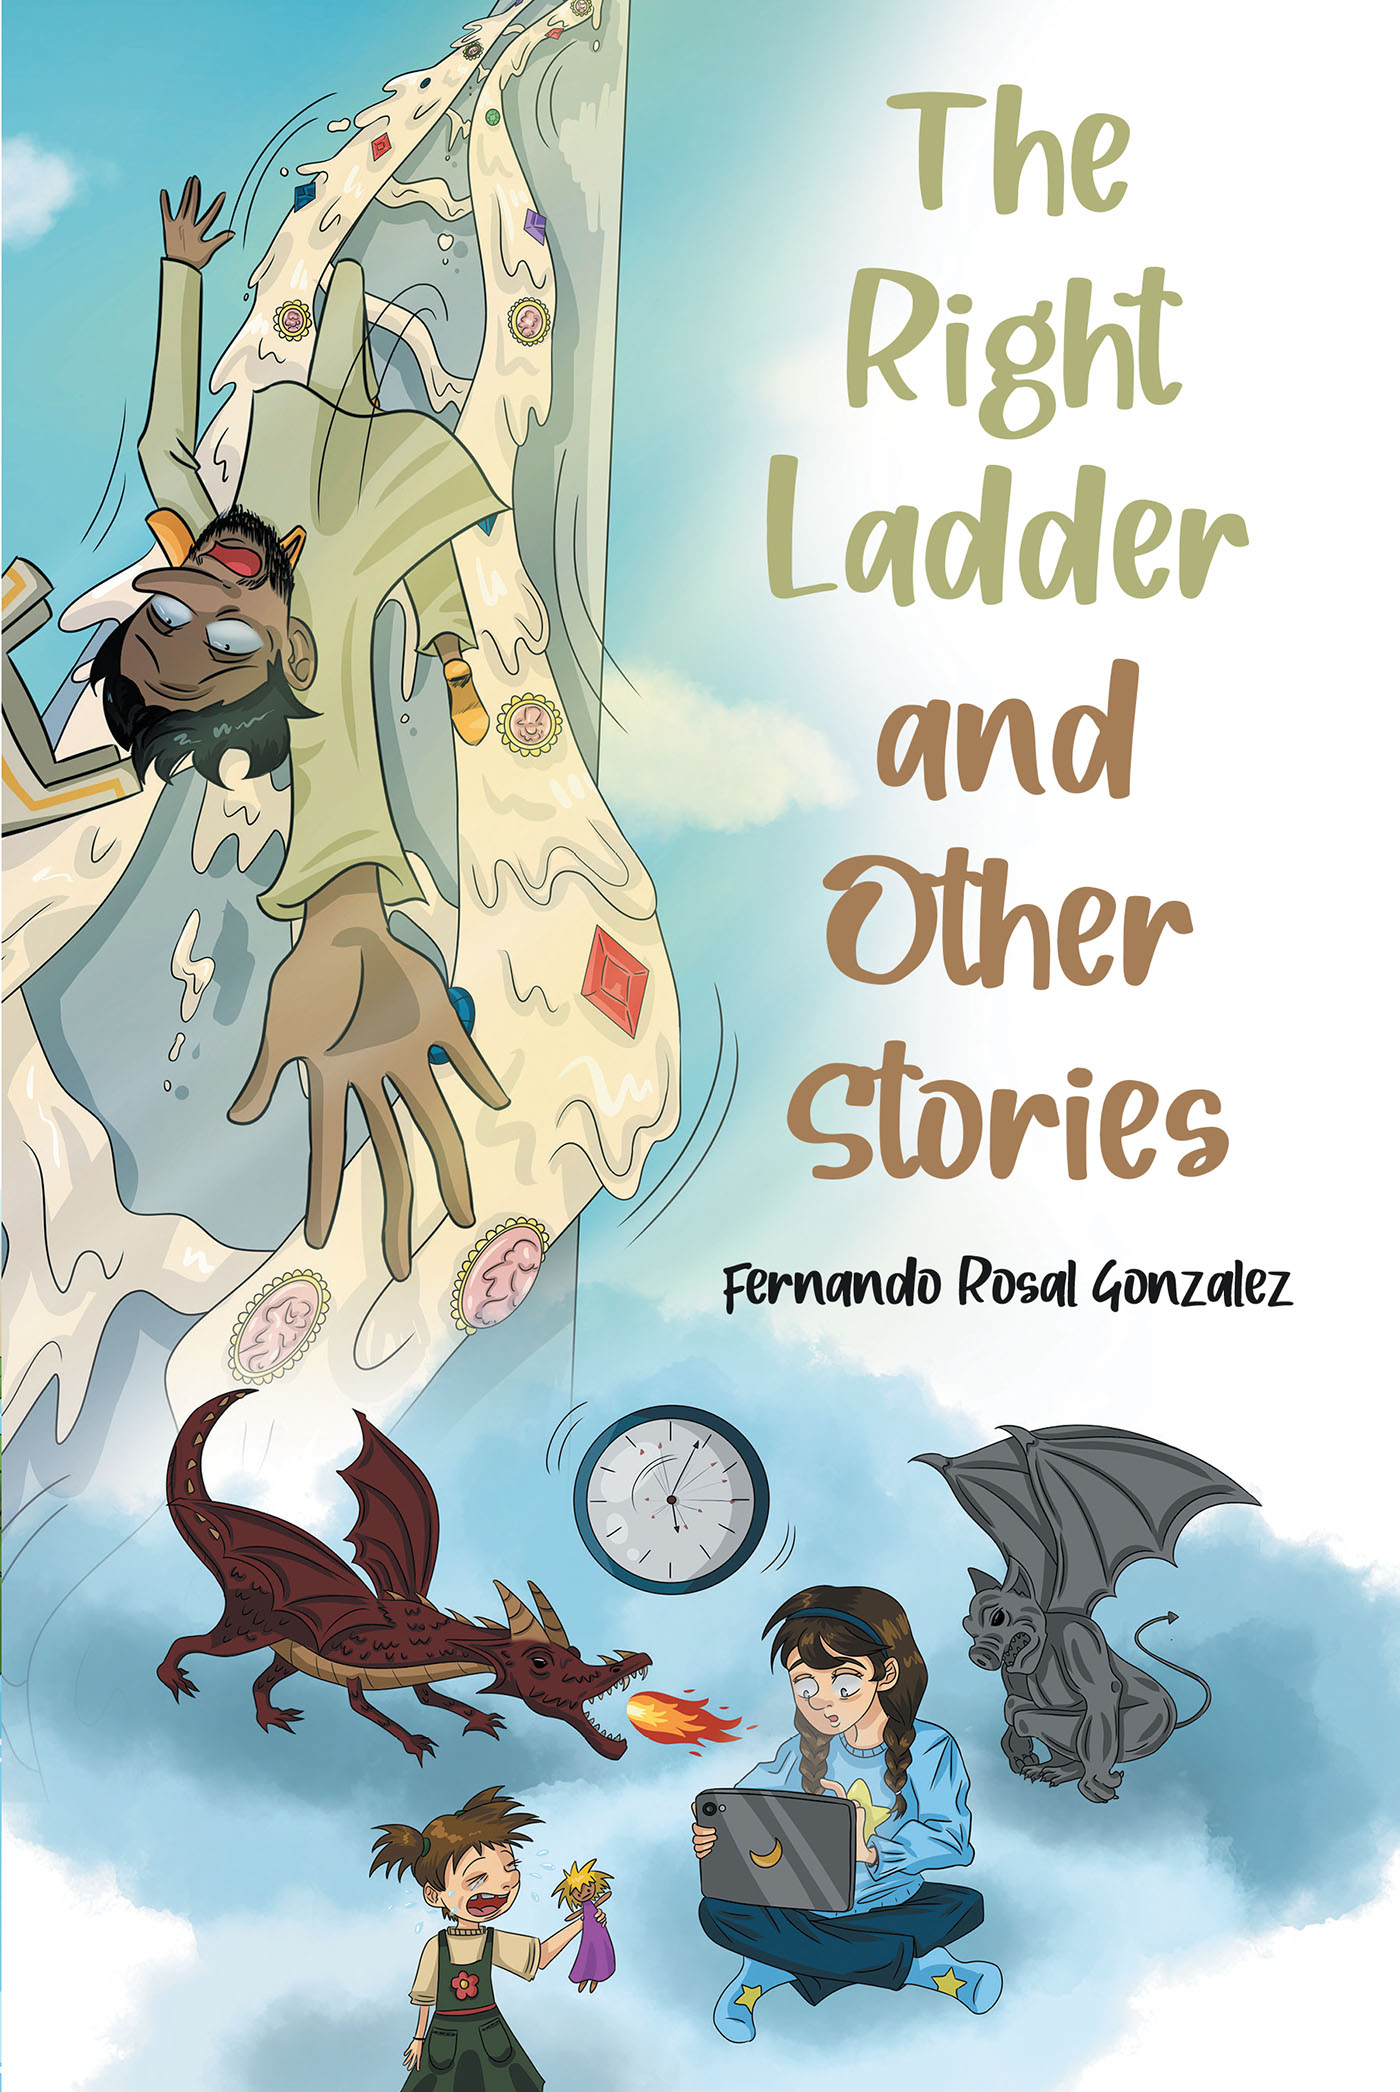 Author Fernando Rosal Gonzalez’s New Book, "The Right Ladder and Other Stories," Explores the Difficulties That Young People of All Walks of Life Face Every Day